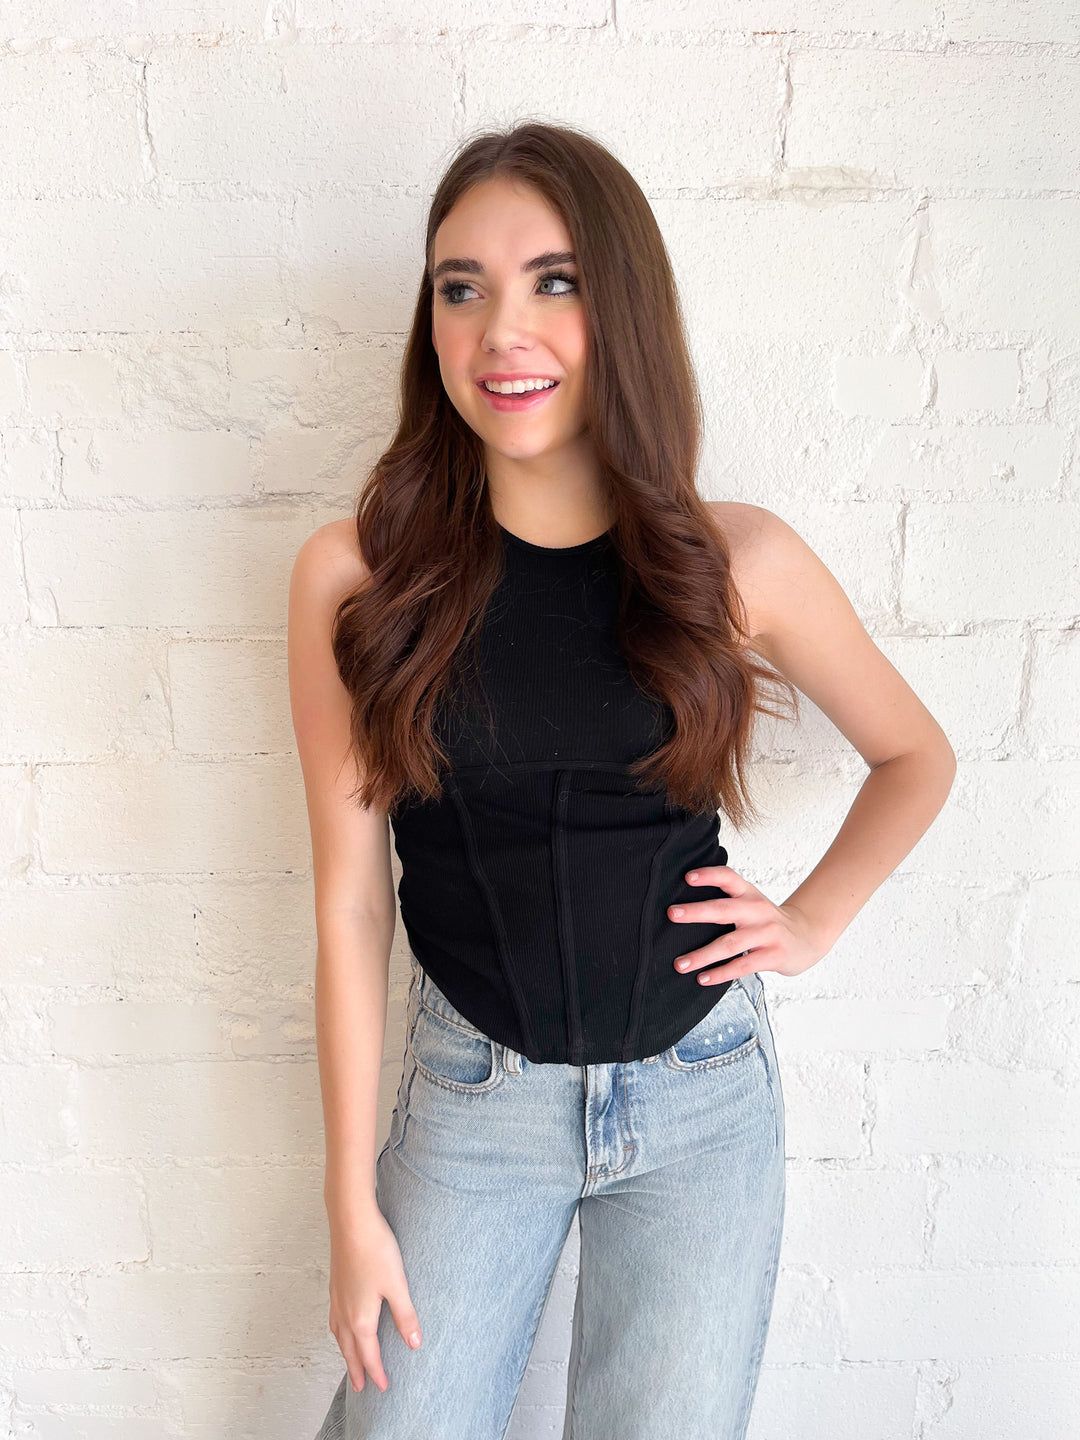 Add To Cart Corset Tank, Tops, Adeline, Adeline, dallas boutique, dallas texas, texas boutique, women's boutique dallas, adeline boutique, dallas boutique, trendy boutique, affordable boutique